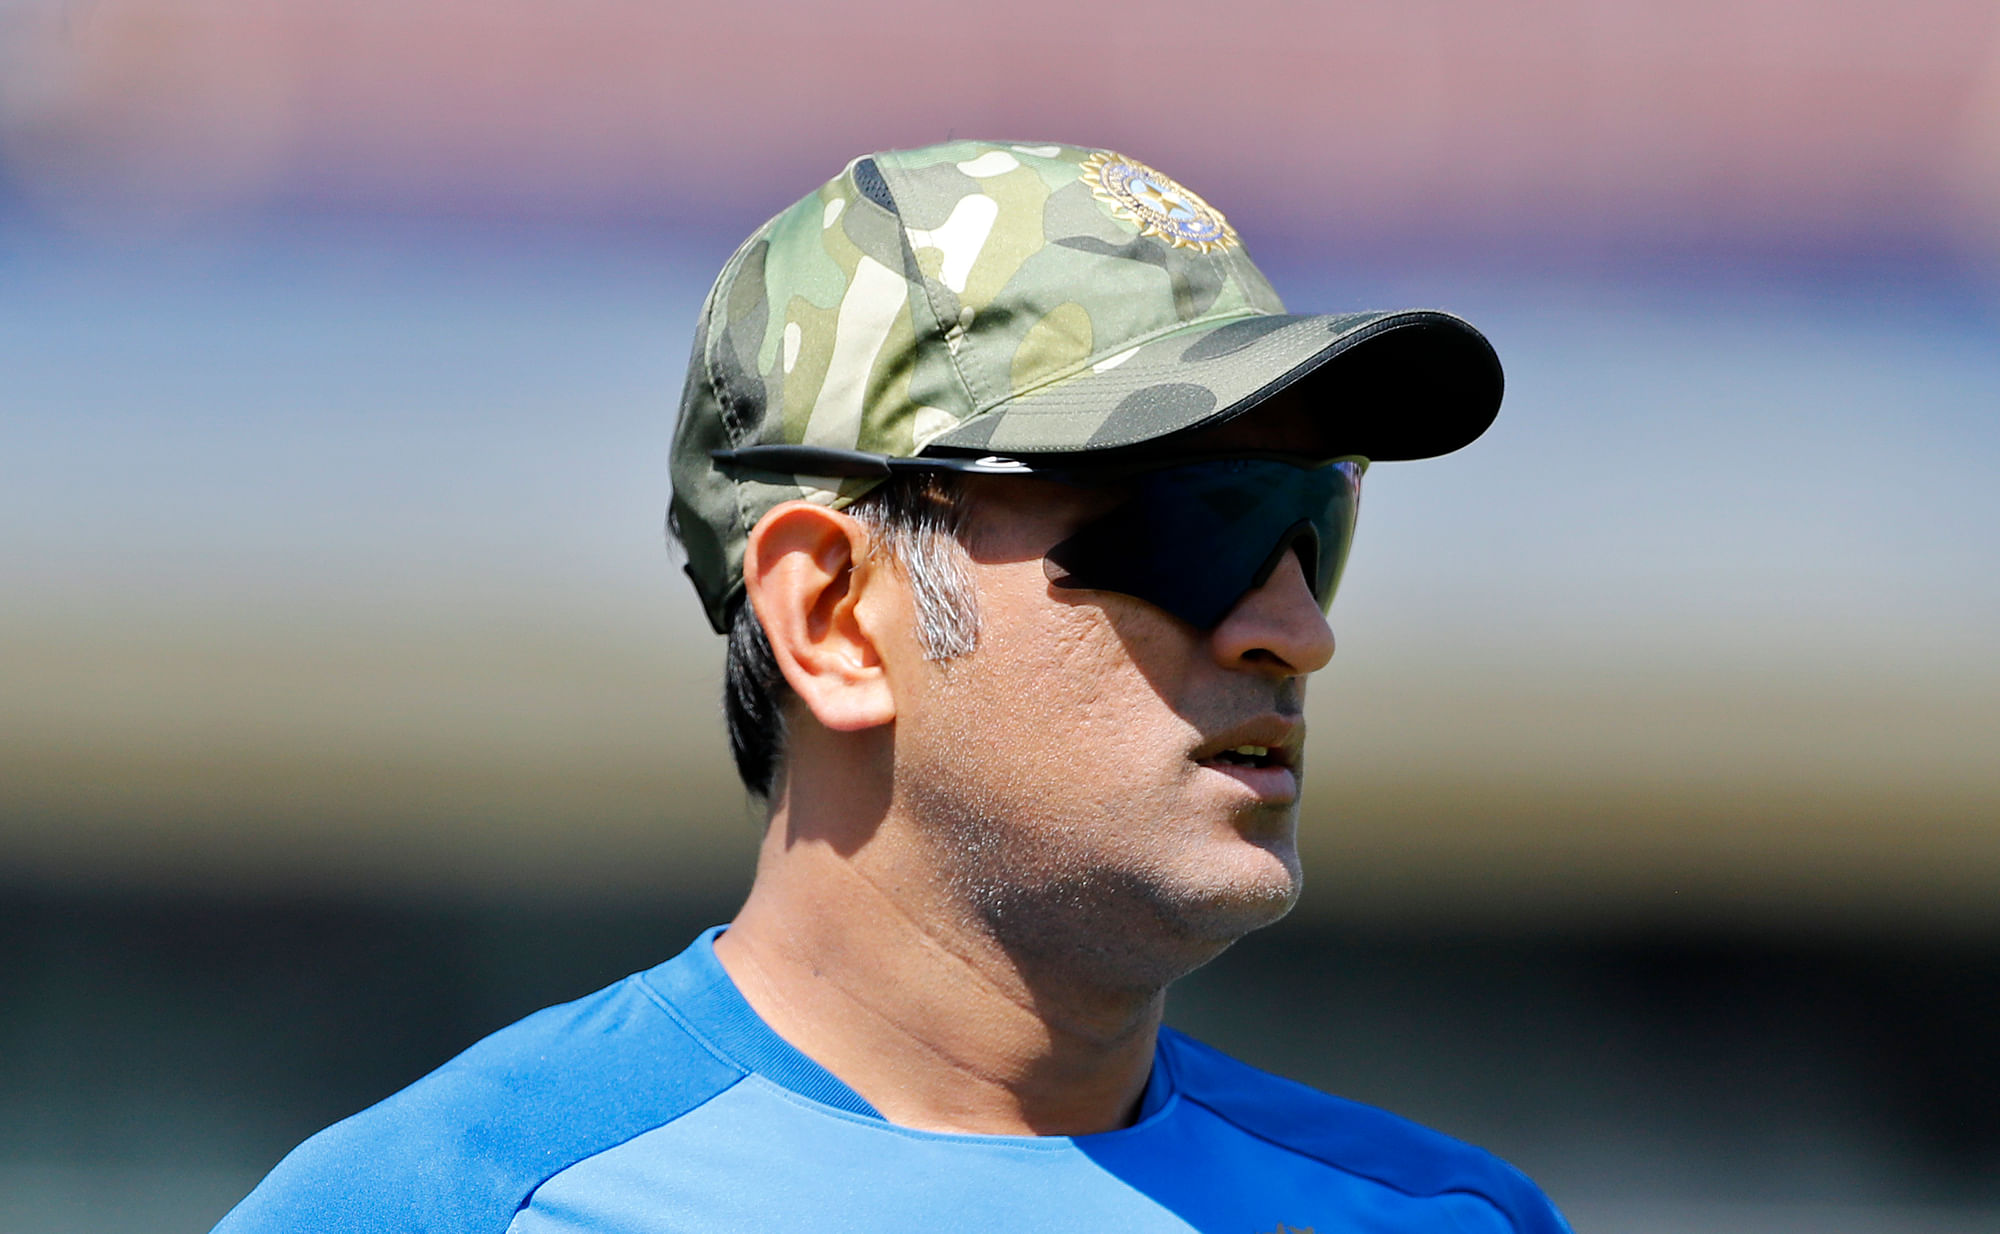 MS Dhoni has informed BCCI that is is joining Parachute Regiment of the Territorial Army.